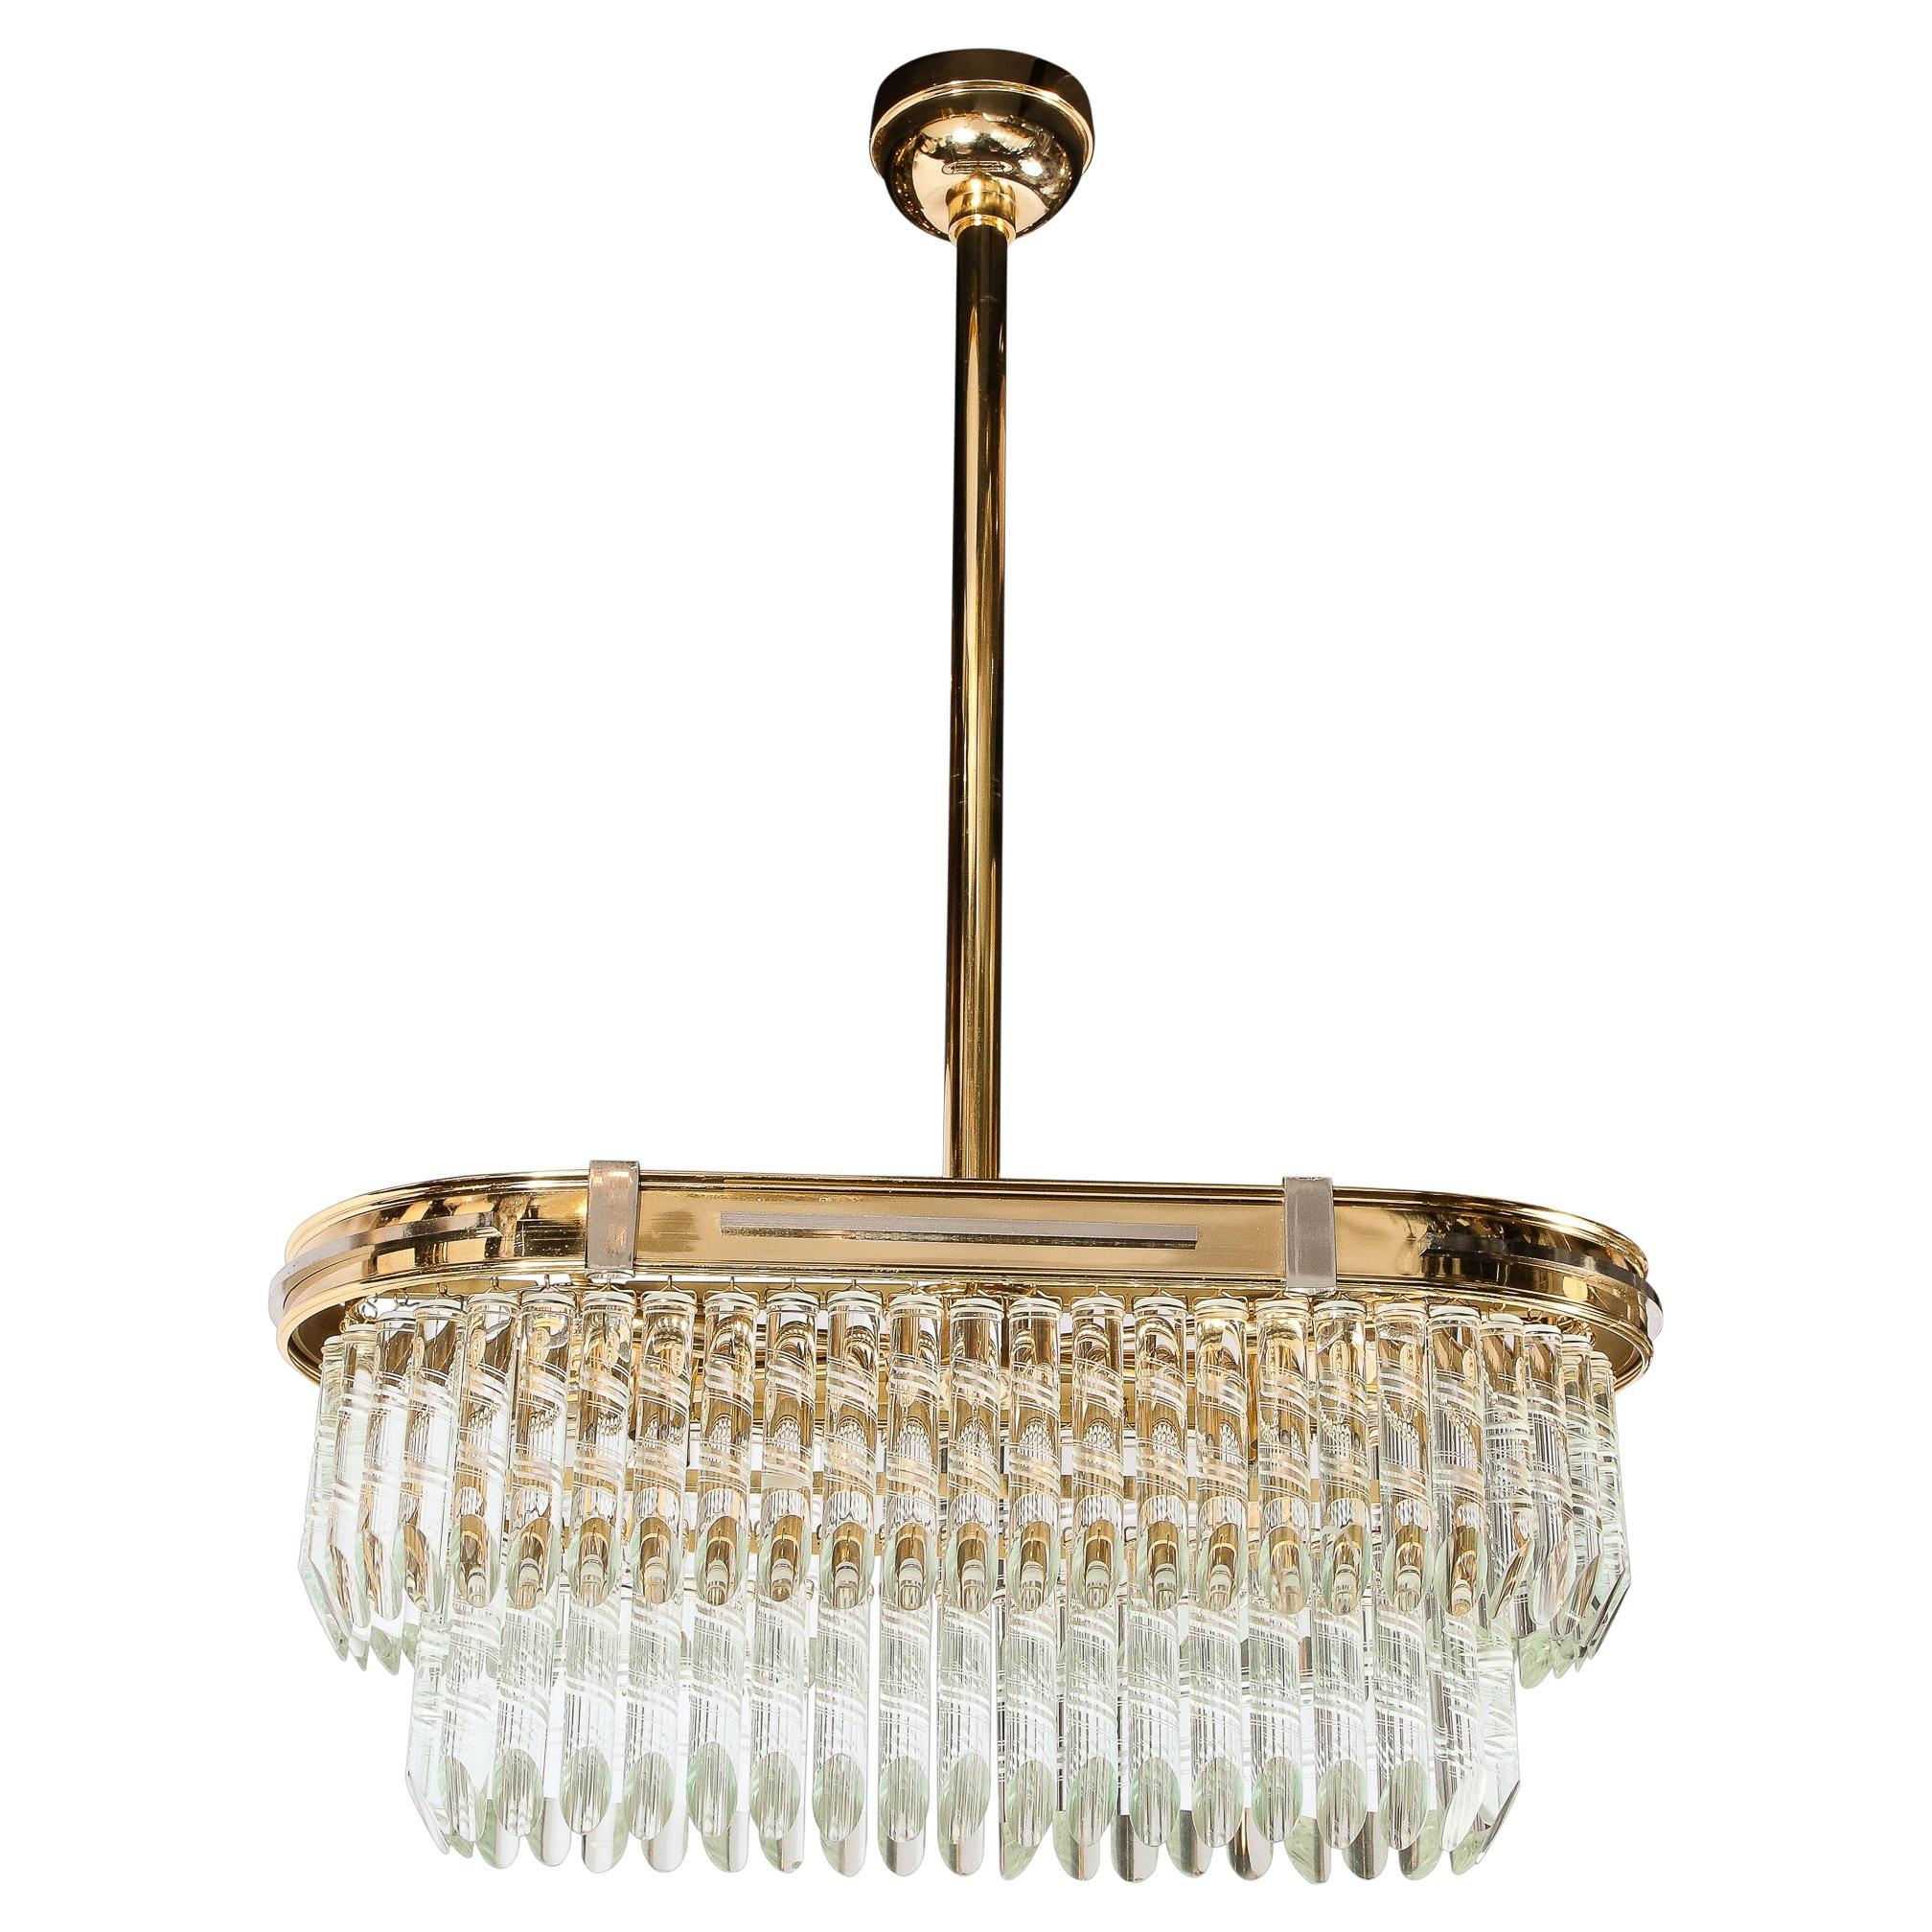 Mid-Century Modernist Oval Form Two-Tier Brass, Nickel & Cut Crystal Chandelier For Sale